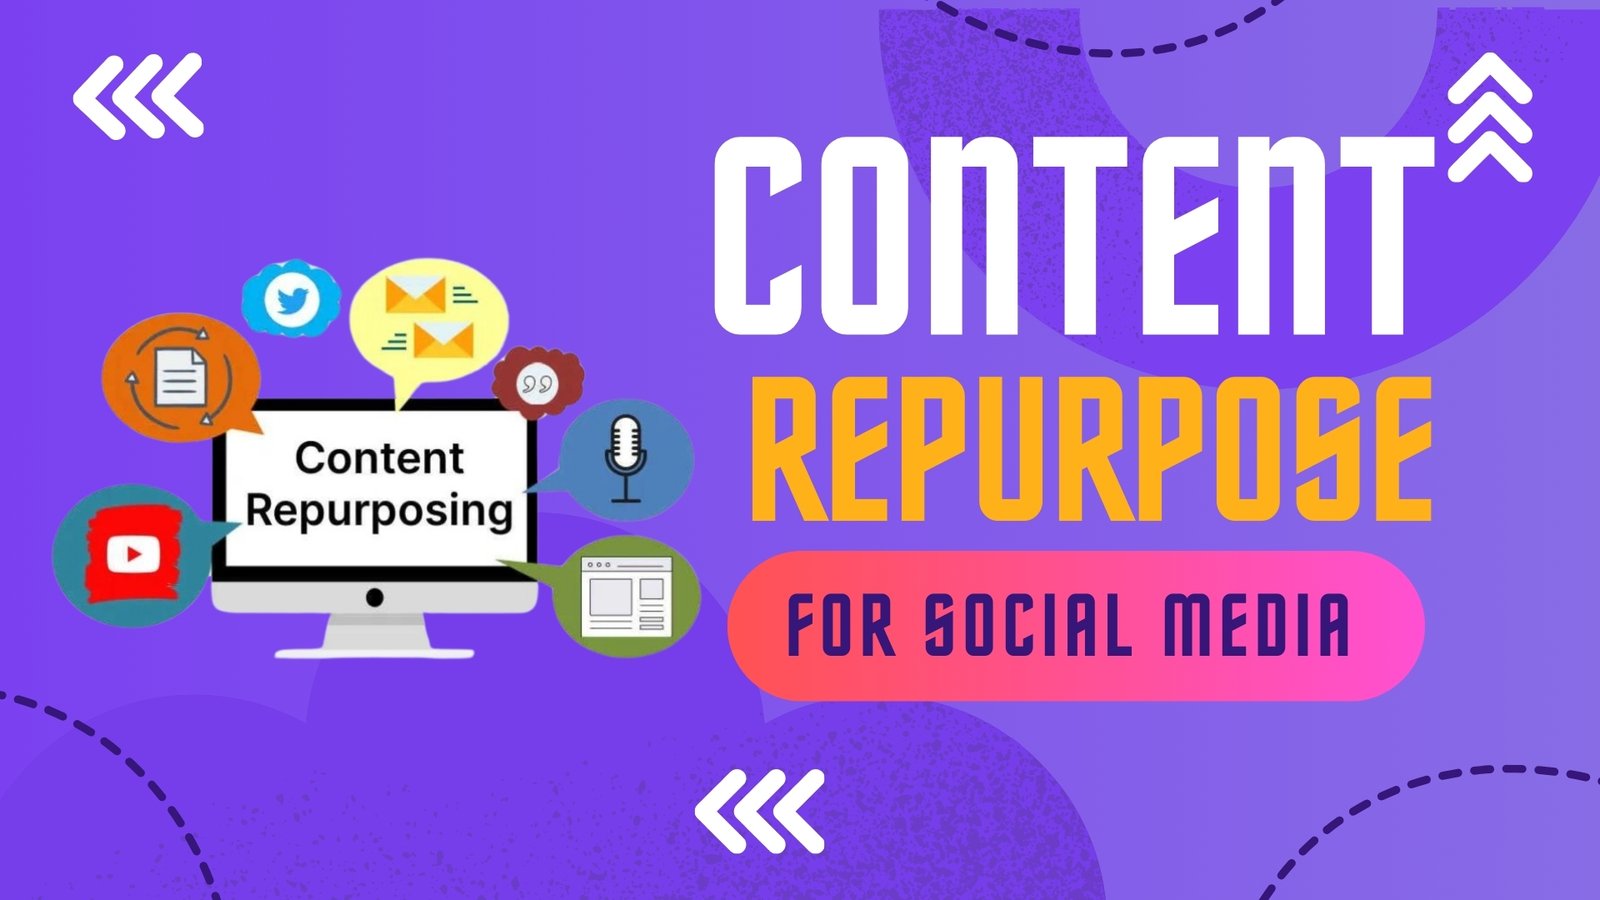 How to Repurpose Blog Content for Social Media?